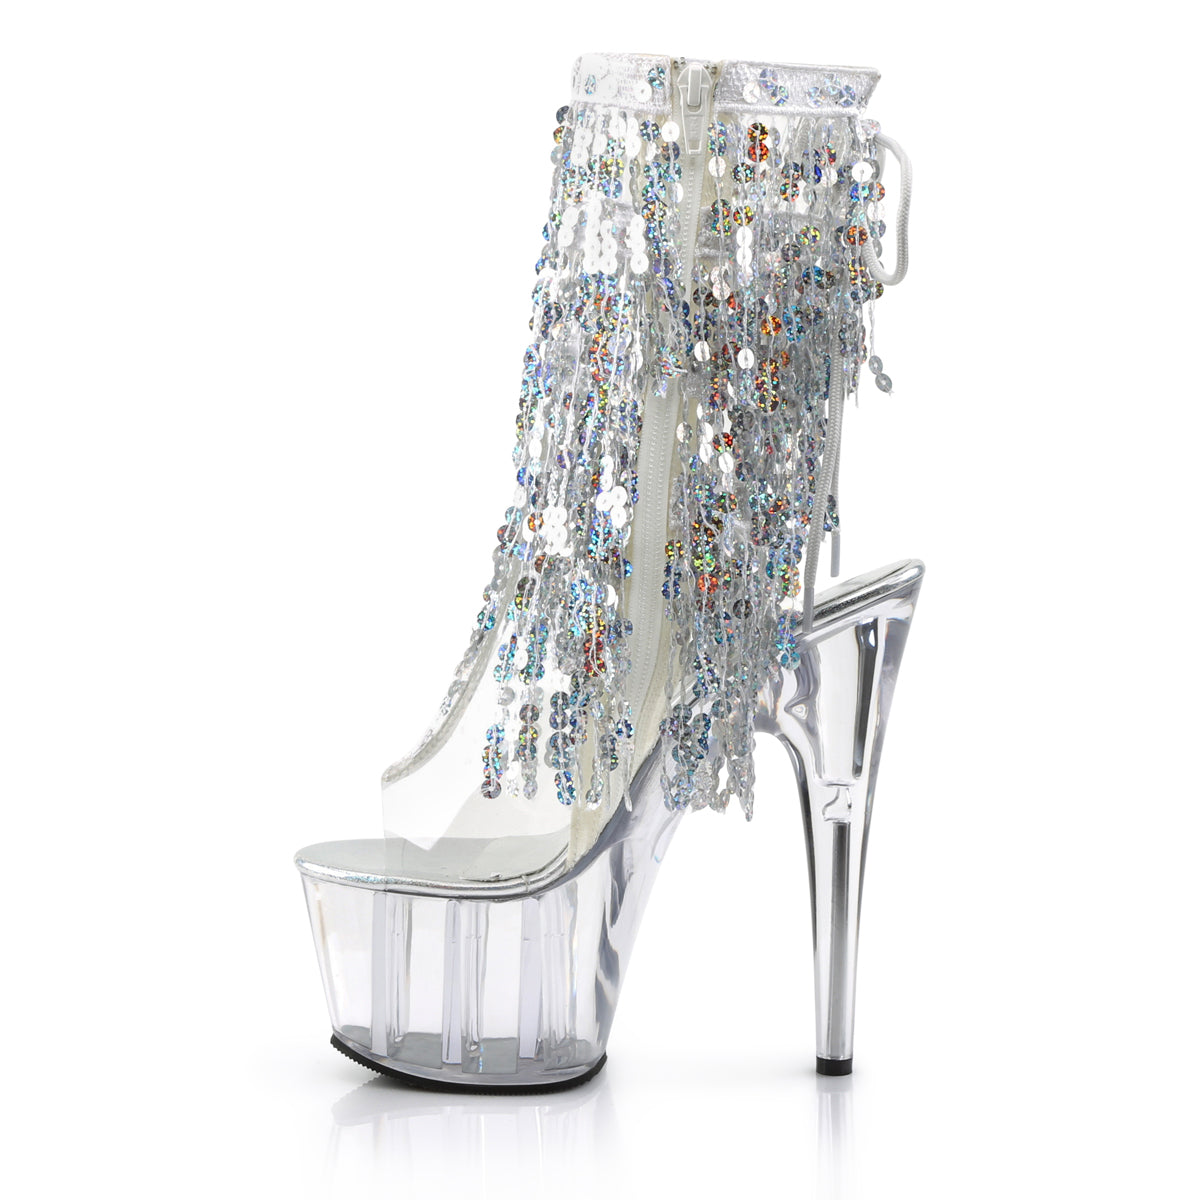 ADORE-1017SQF 7" Heel Clear Silver Pole Dancing Ankle Boots-Pleaser- Sexy Shoes Pole Dance Heels